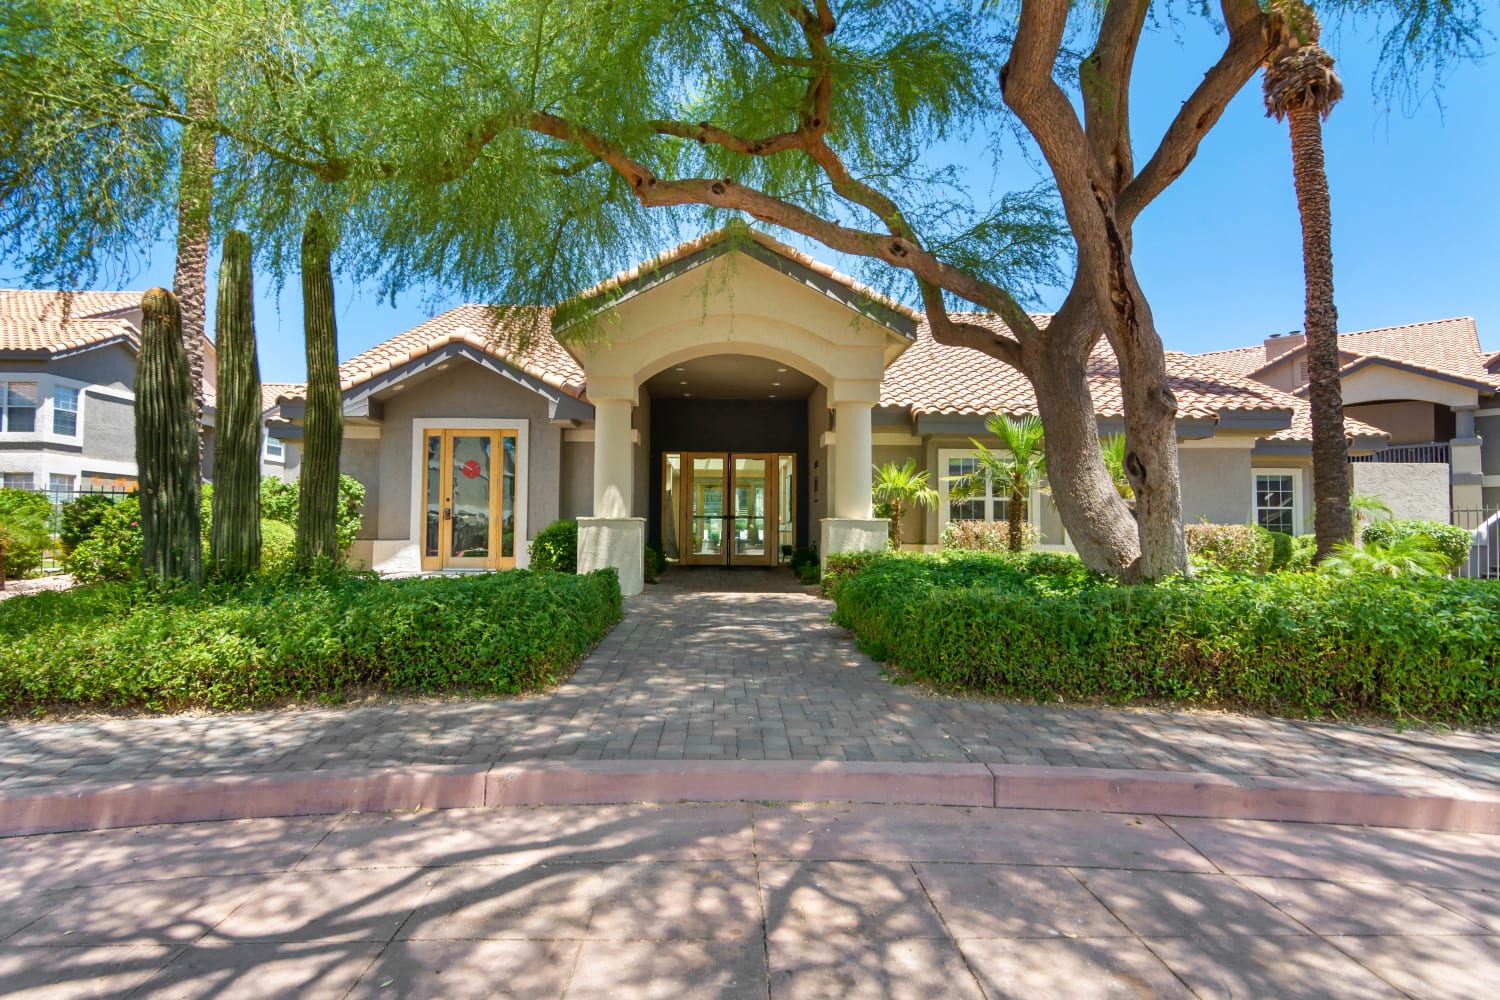 Entrance to leasing office at Sonoran Vista Apartments in Scottsdale, Arizona